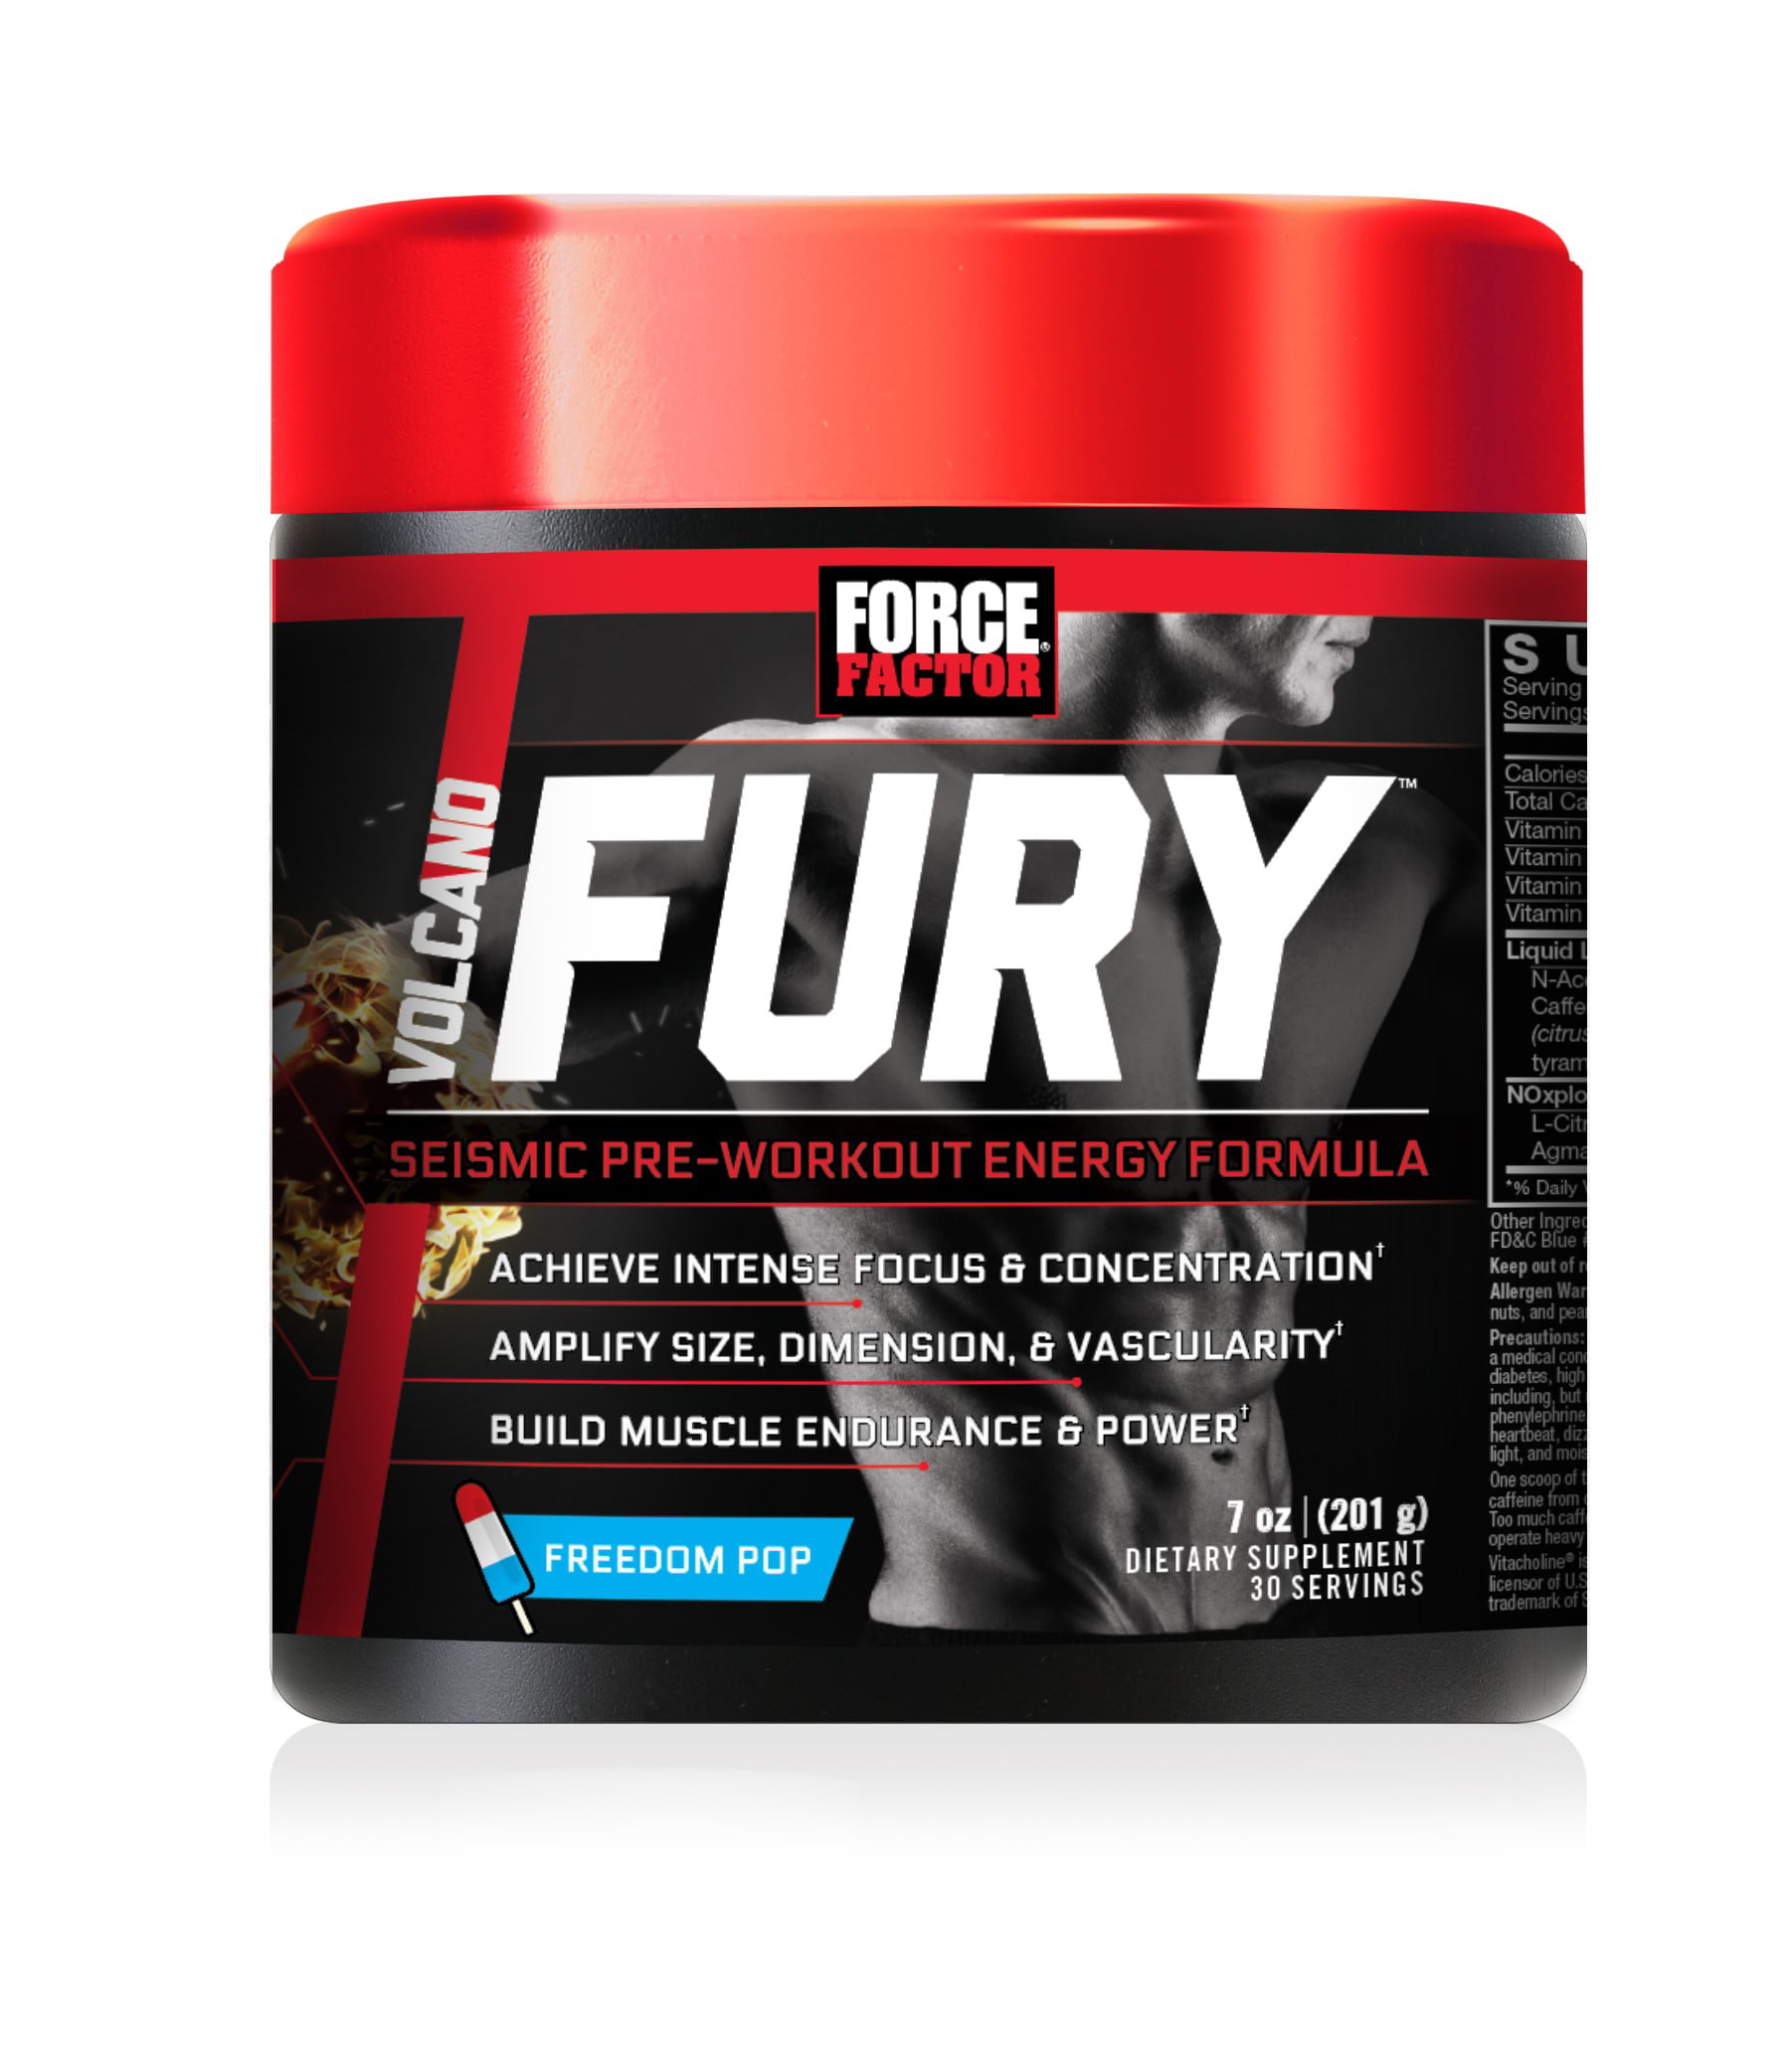 15 Minute Pre Workout No Fury with Comfort Workout Clothes